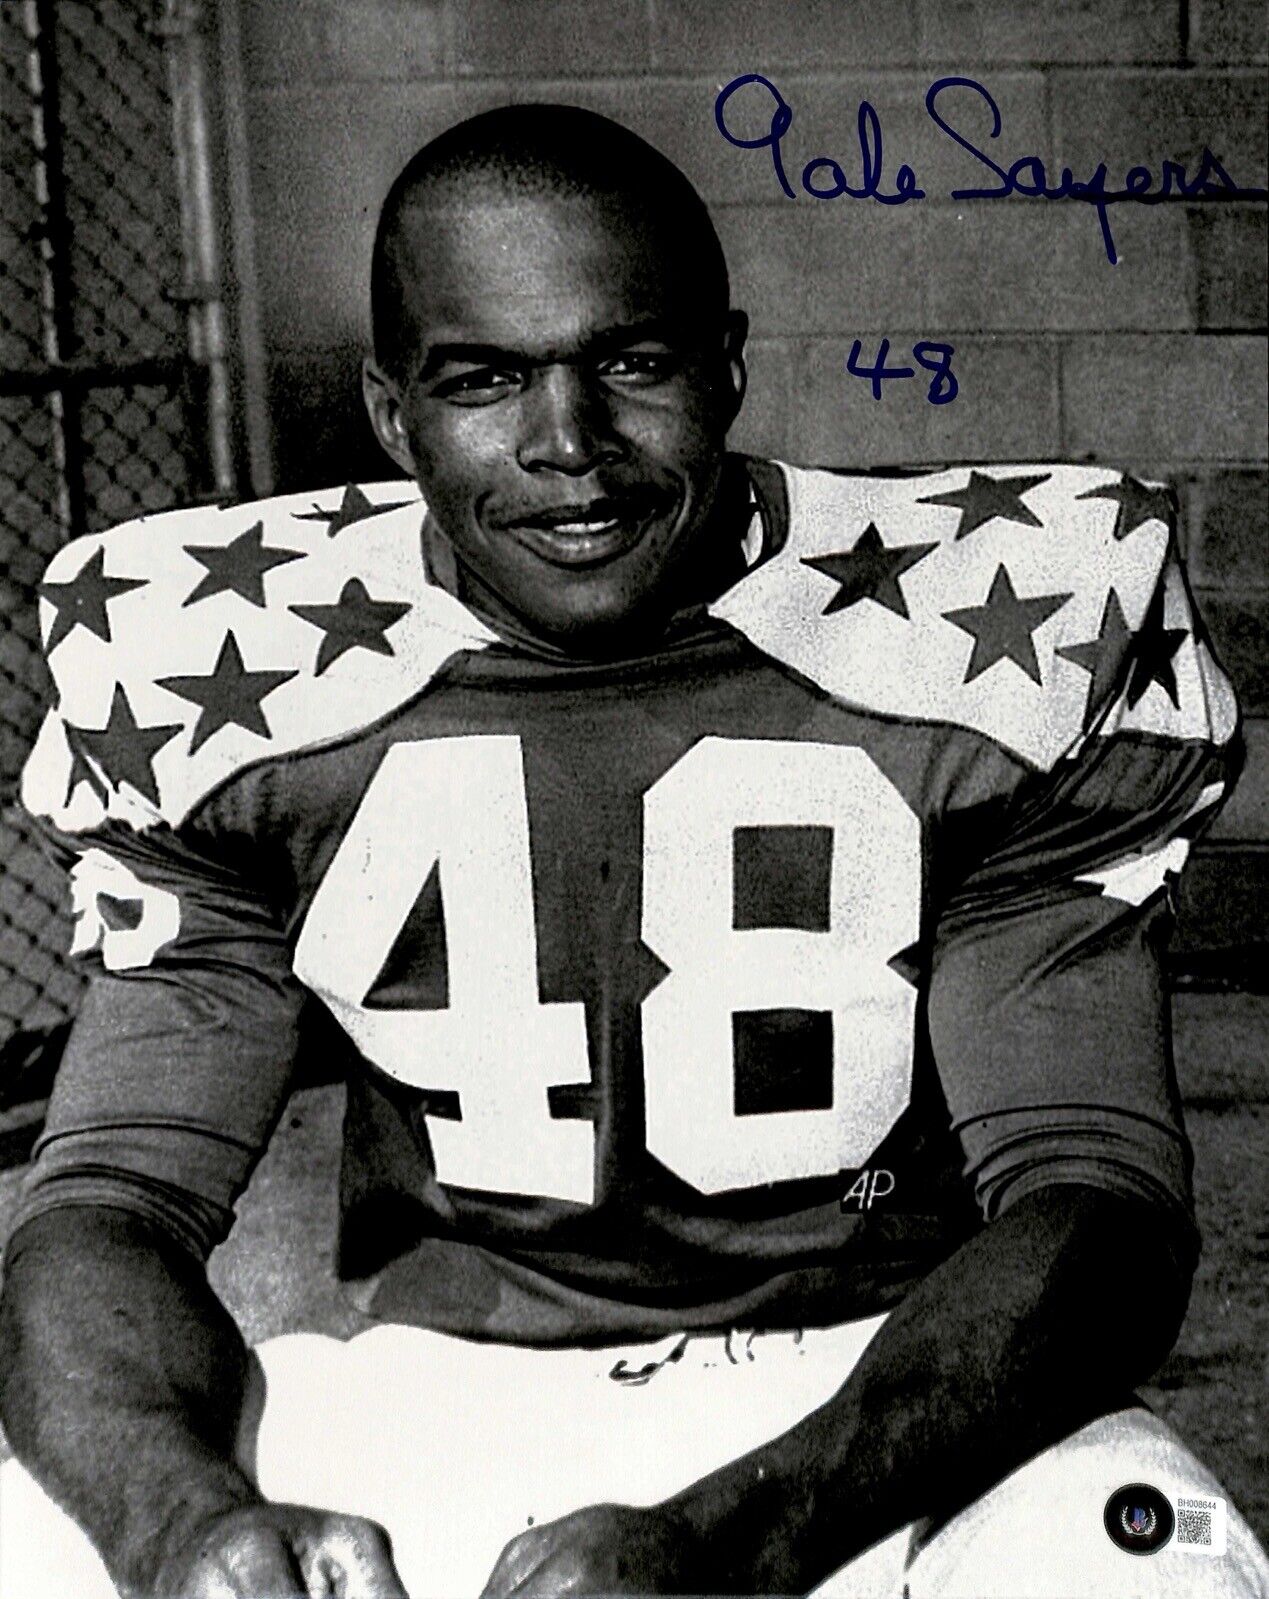 Gale Sayers College All Star Signed 11x14 Photograph BECKETT (GRAD COLLECTION)